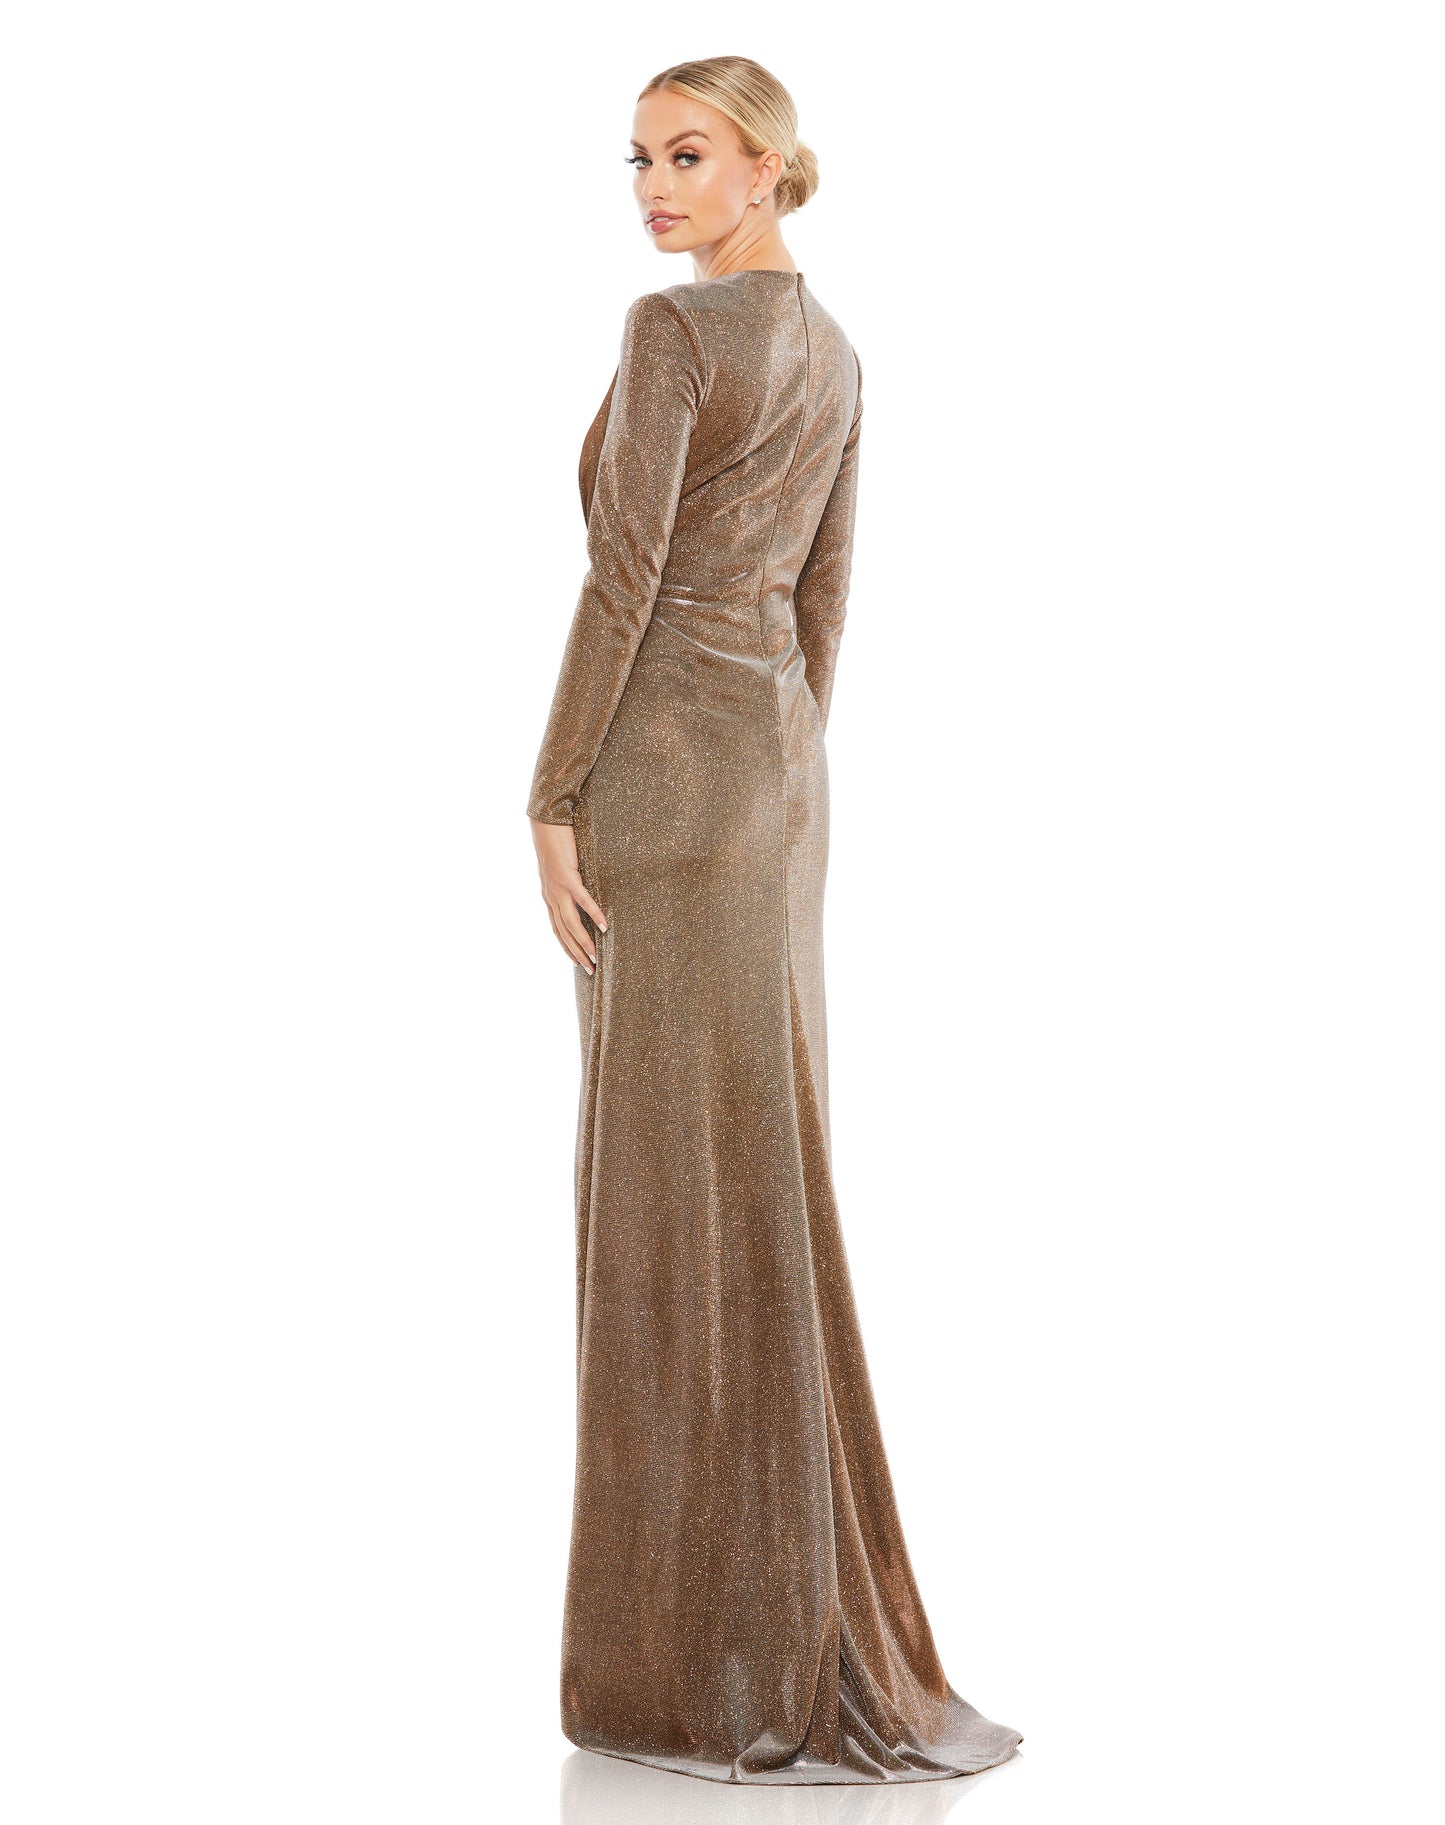 Sparkling metallic long-sleeve gown accented with a twist-front plunging neckline and a thigh-high slit. Ieena for Mac Duggal Fully lined Bust Pads Back Zipper 100% Polyester Long Sleeve Thigh-high Slit Full Length V-Neck Style #26194